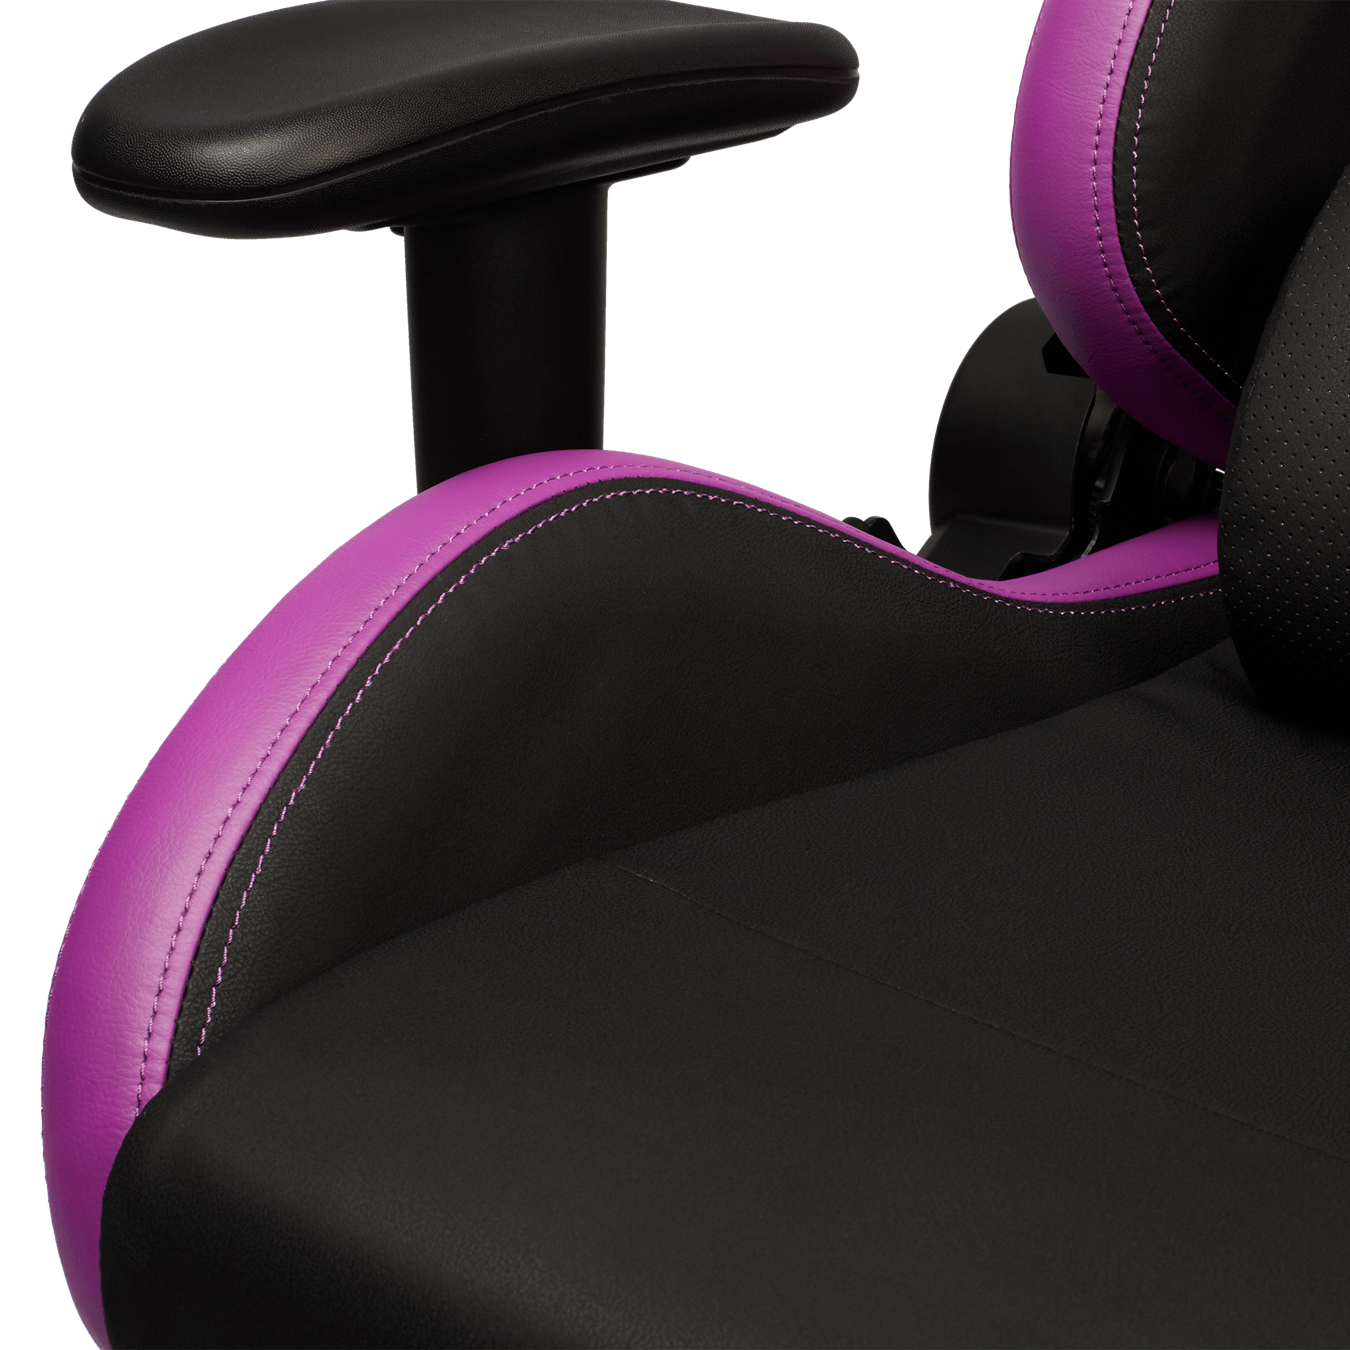 Caliber R2 Purple - Upgraded premium quality and design sets you apart from the competition